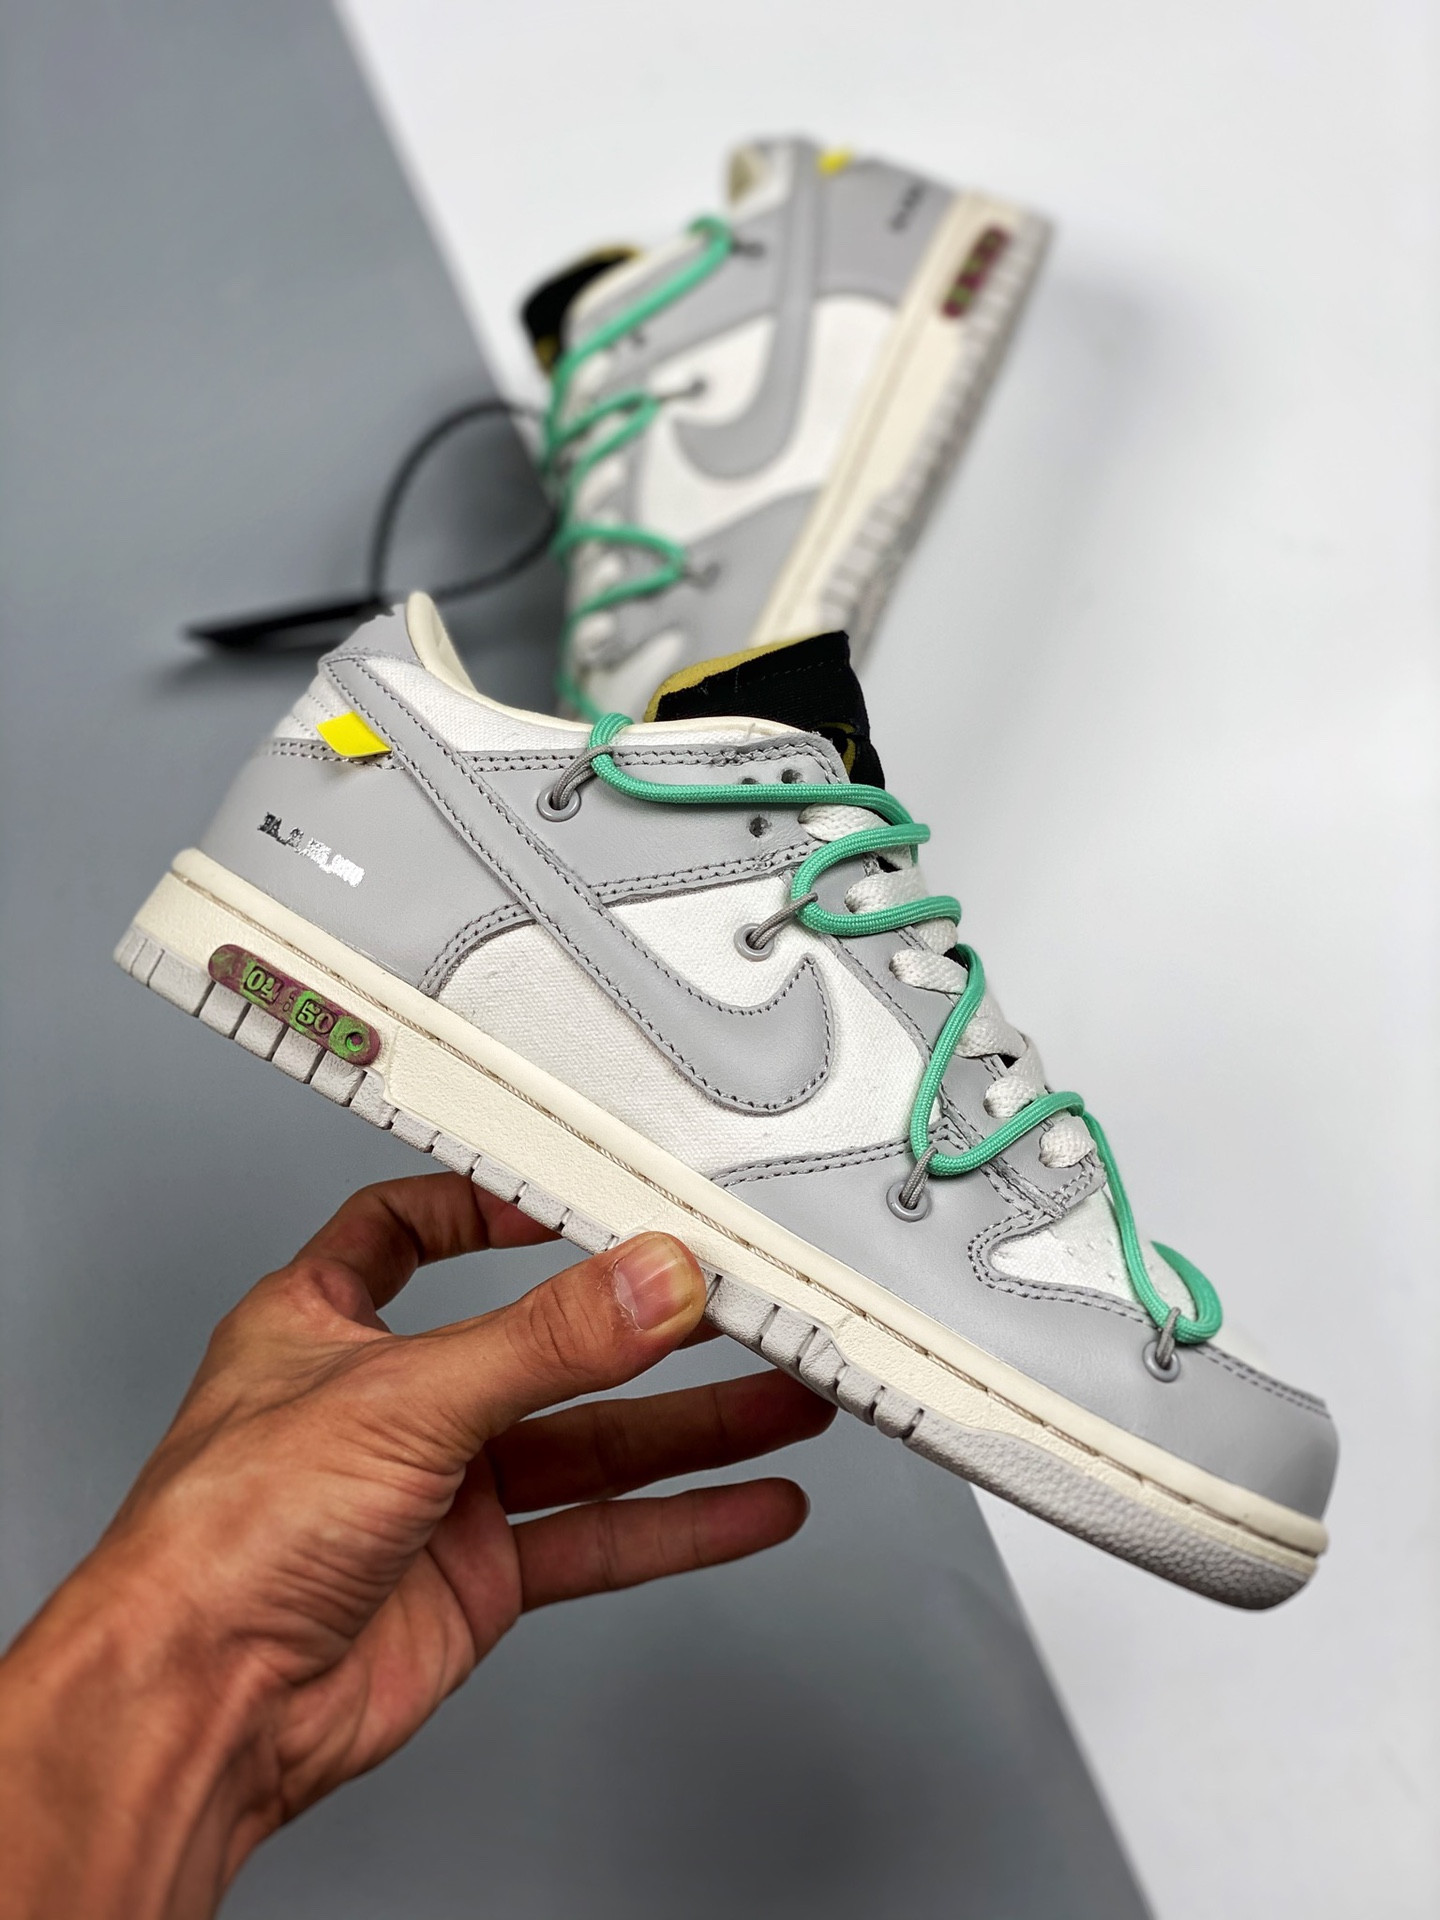 Off-White x Nike Dunk Low 04 of 50 Sail Grey Black For Sale